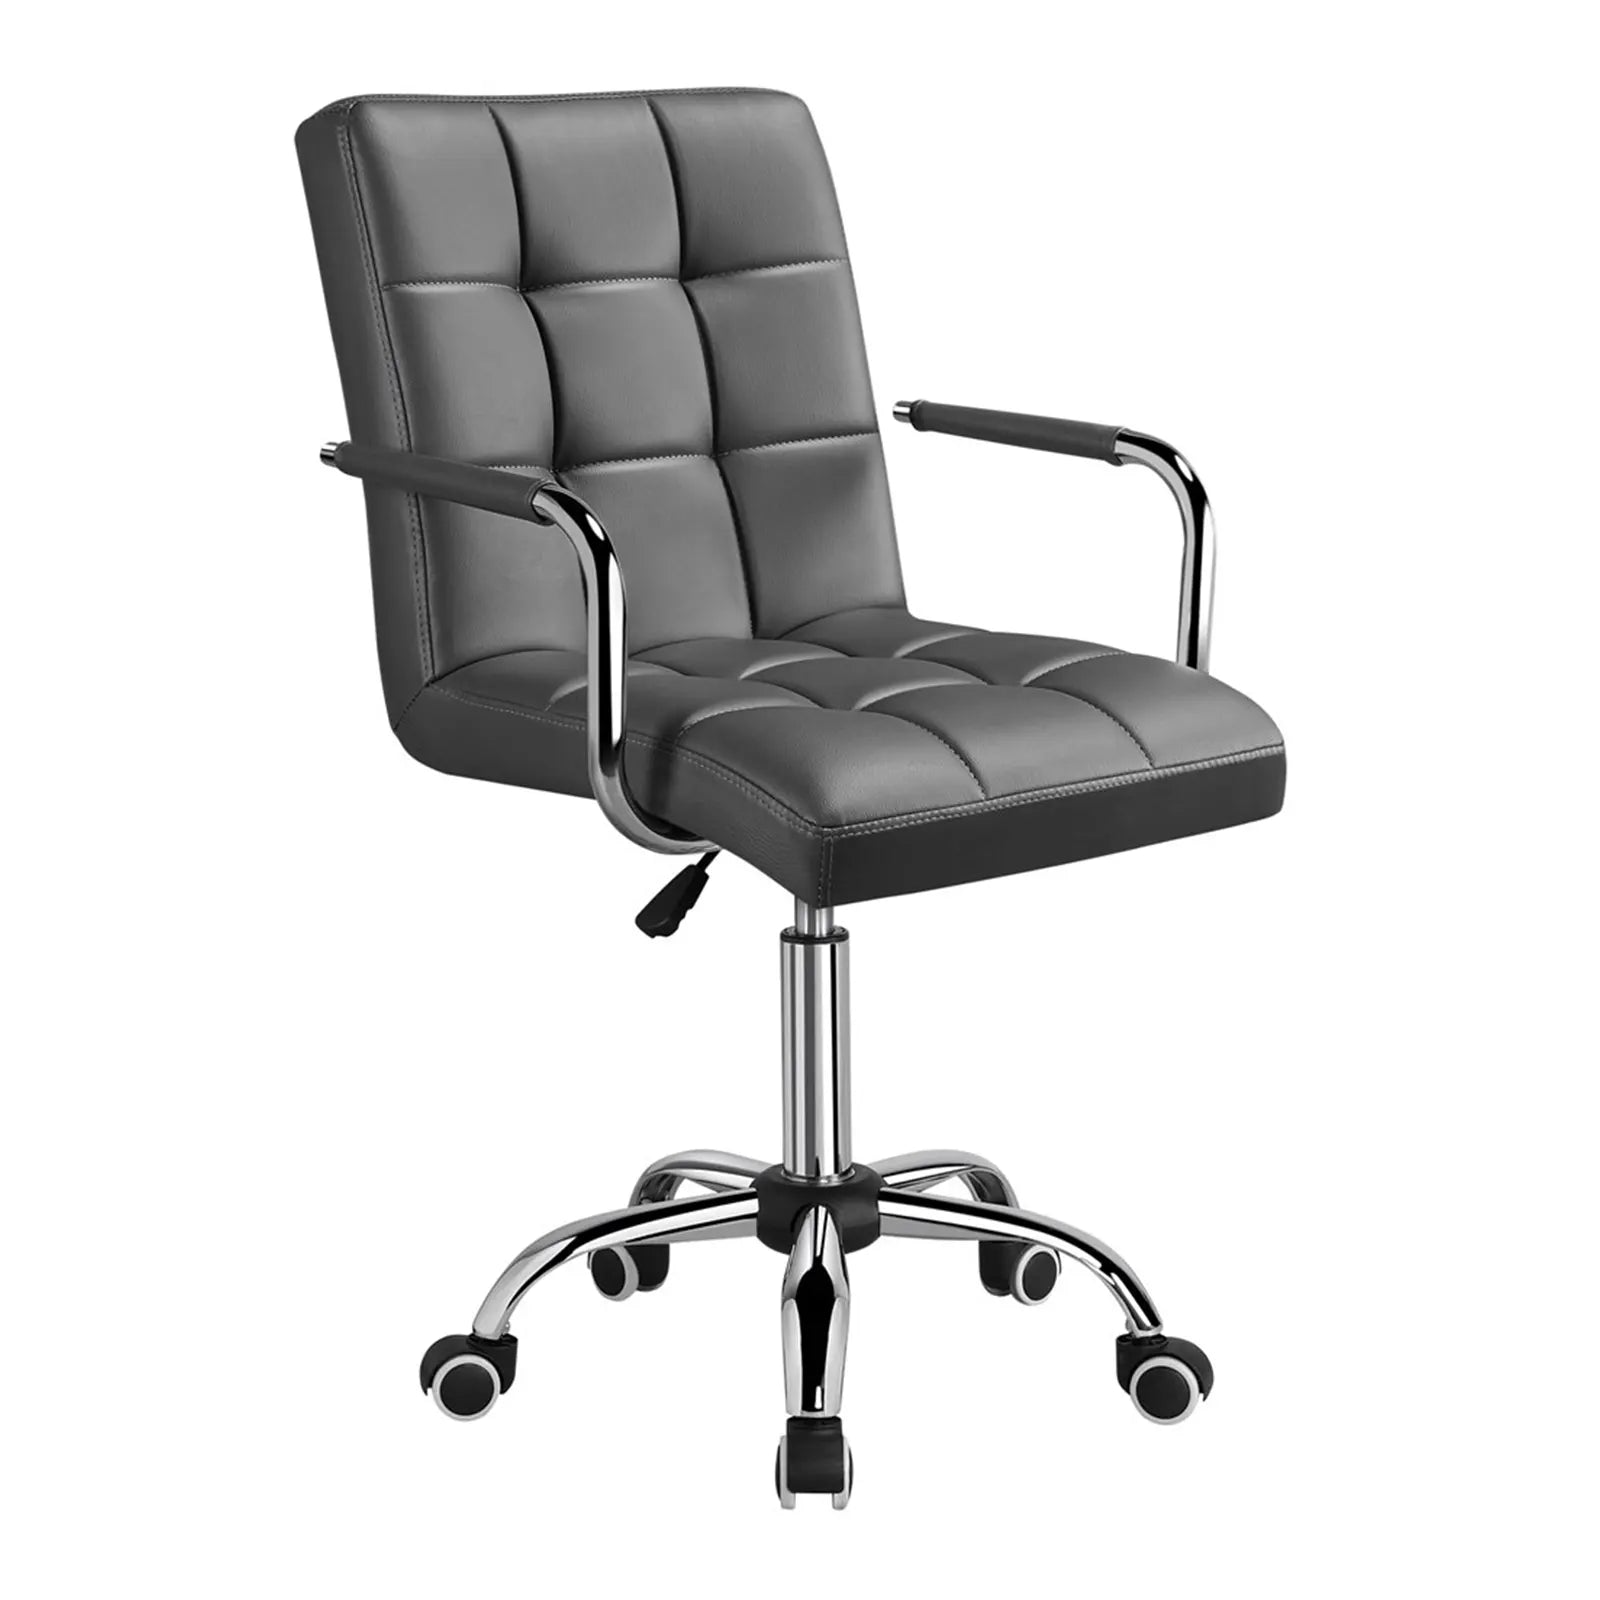 Height Adjustable PU Leather Office Chair with 360° Swivel on Wheels